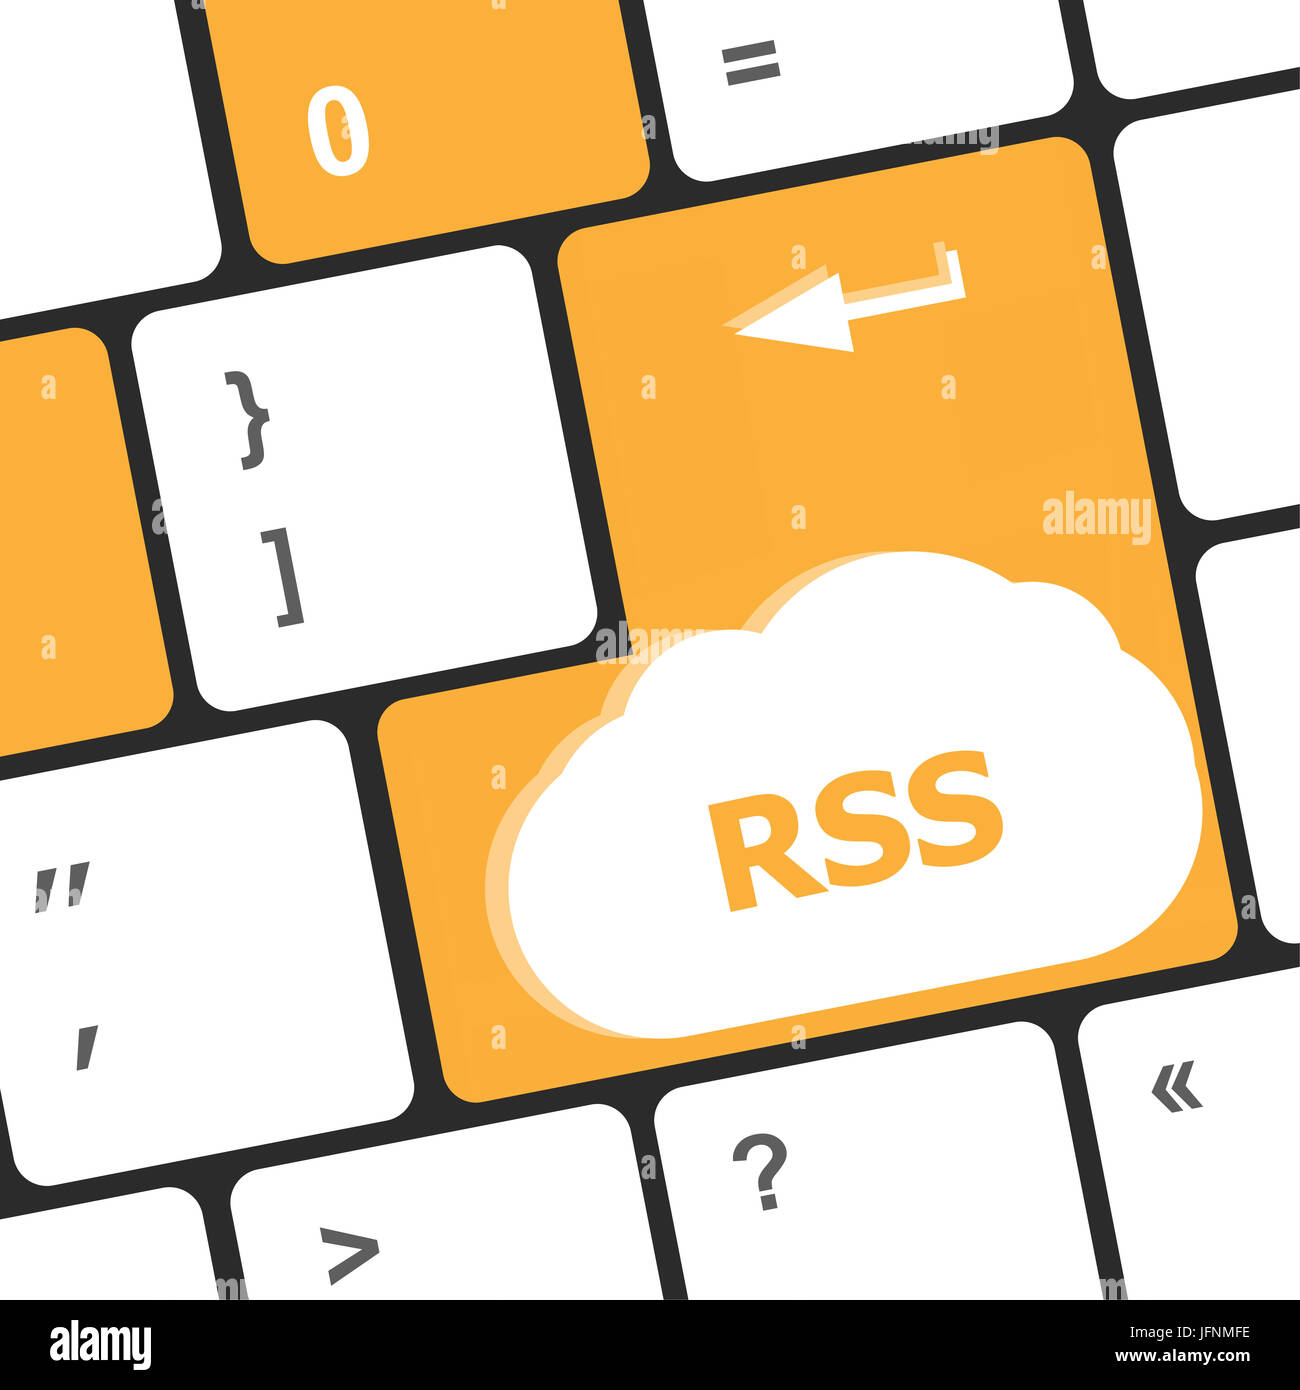 RSS button on keyboard key close-up, business concept Stock Photo